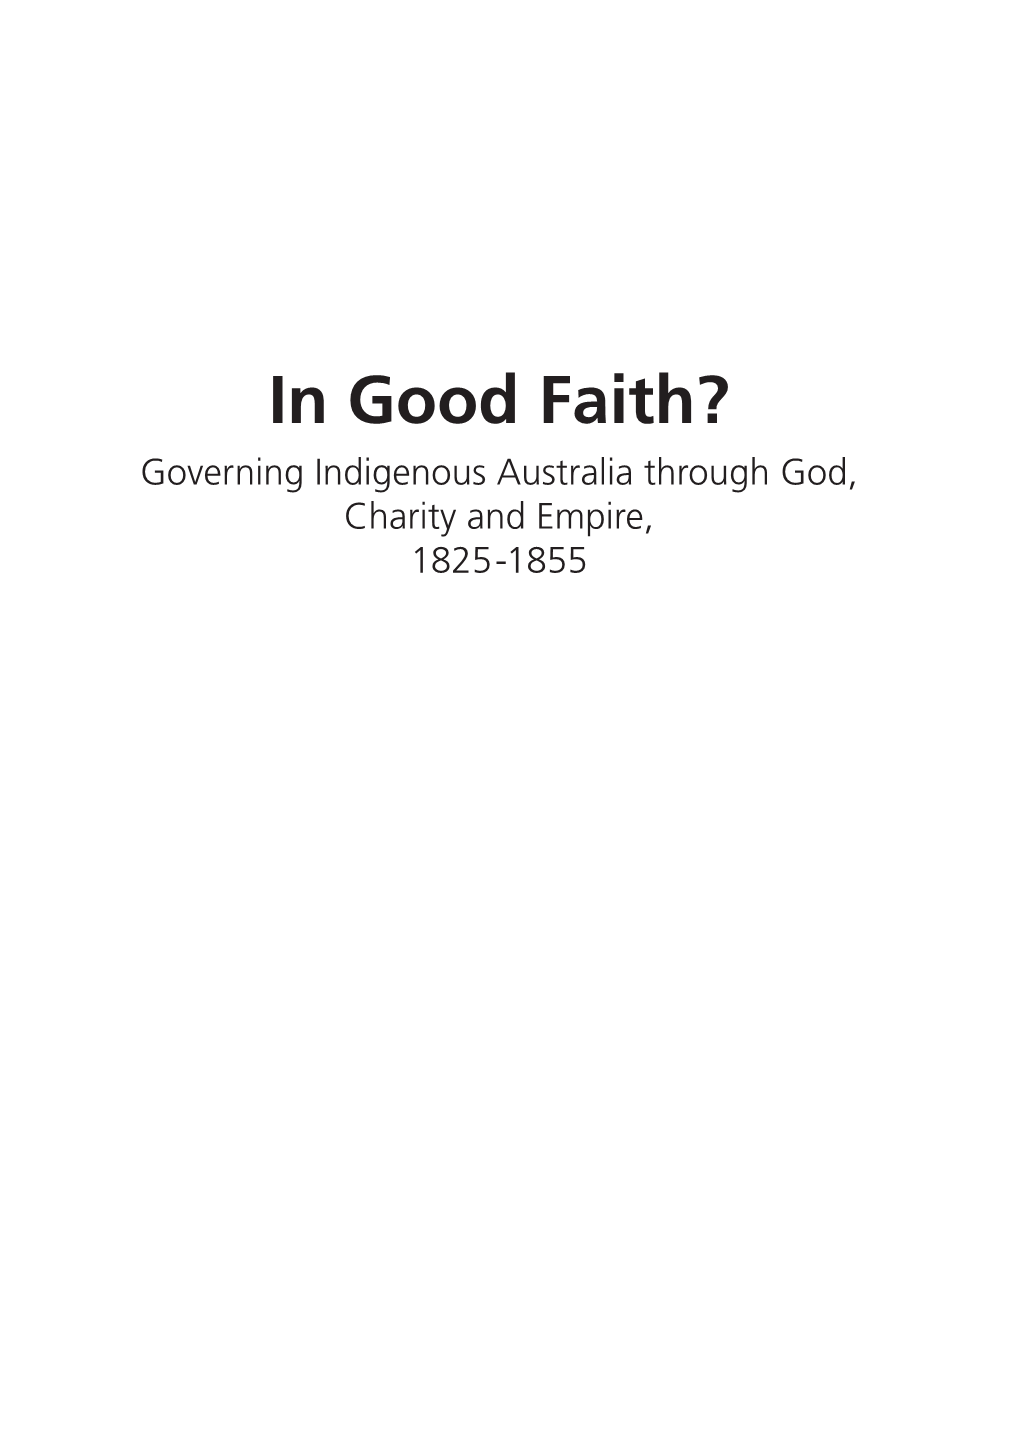 In Good Faith? Governing Indigenous Australia Through God, Charity and Empire, 1825-1855